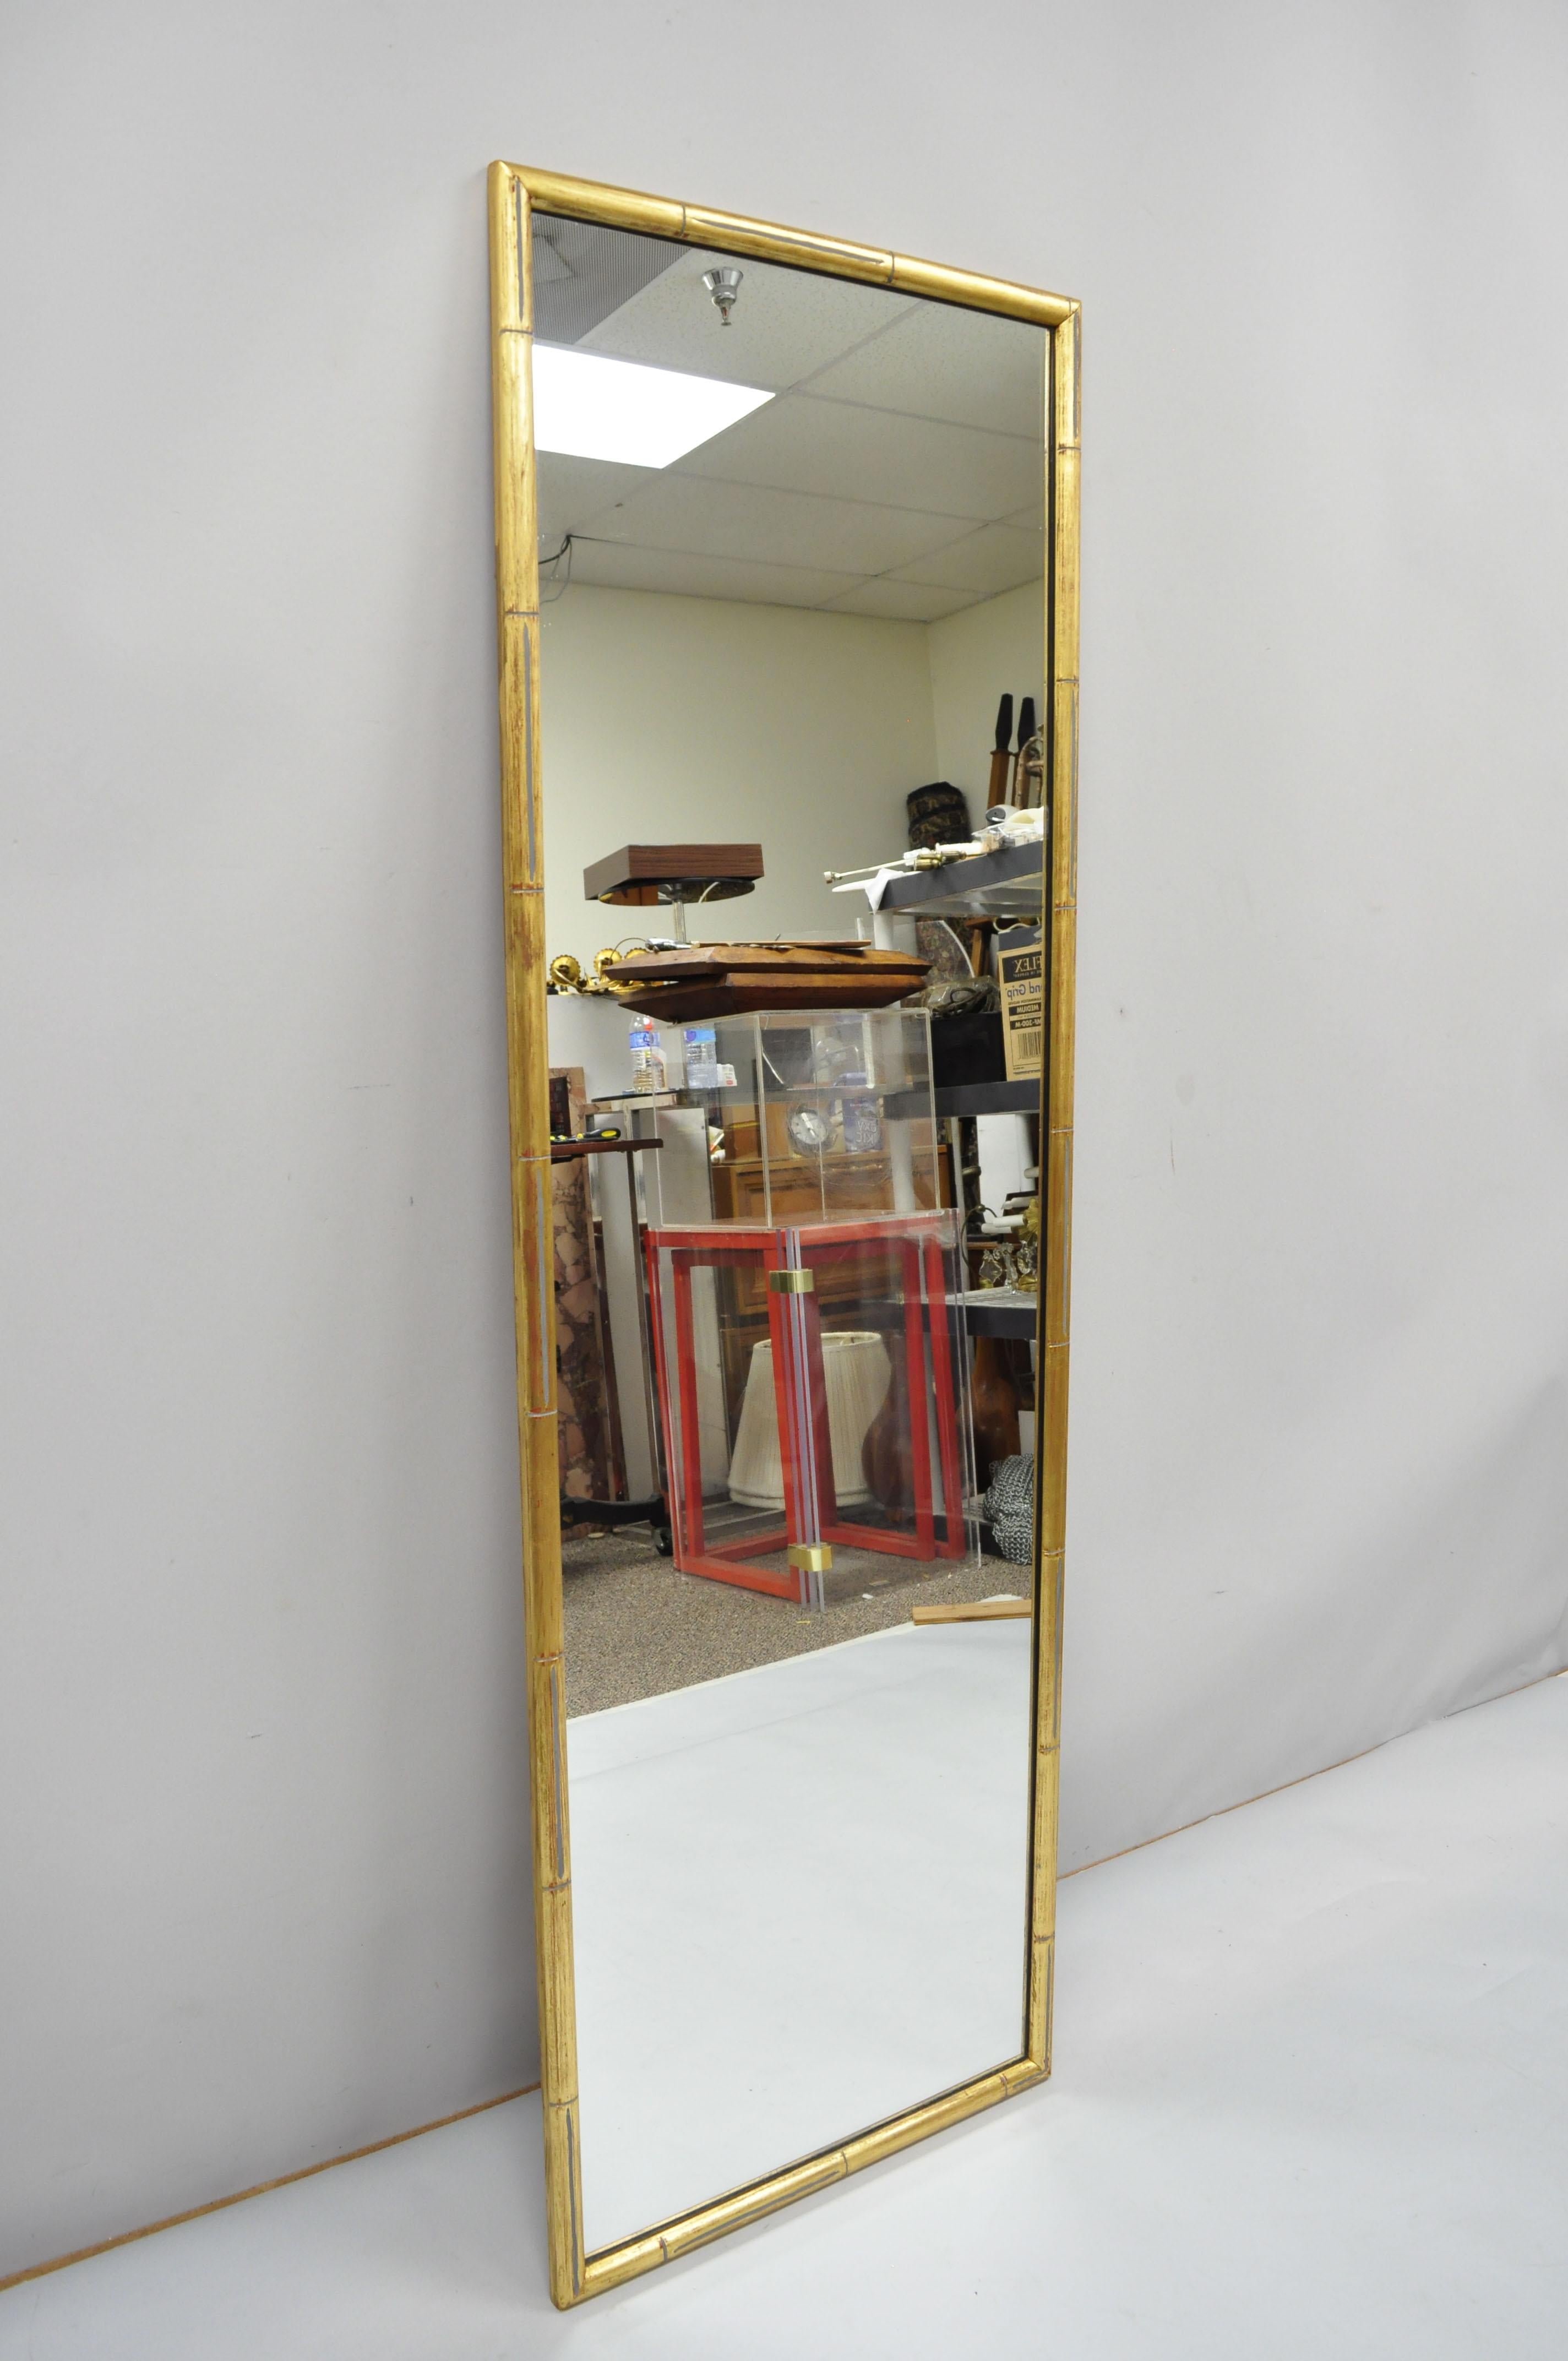 3 Vintage Italian Hollywood Regency Faux Bamboo Wood Frame Gold Wall Mirrors 6